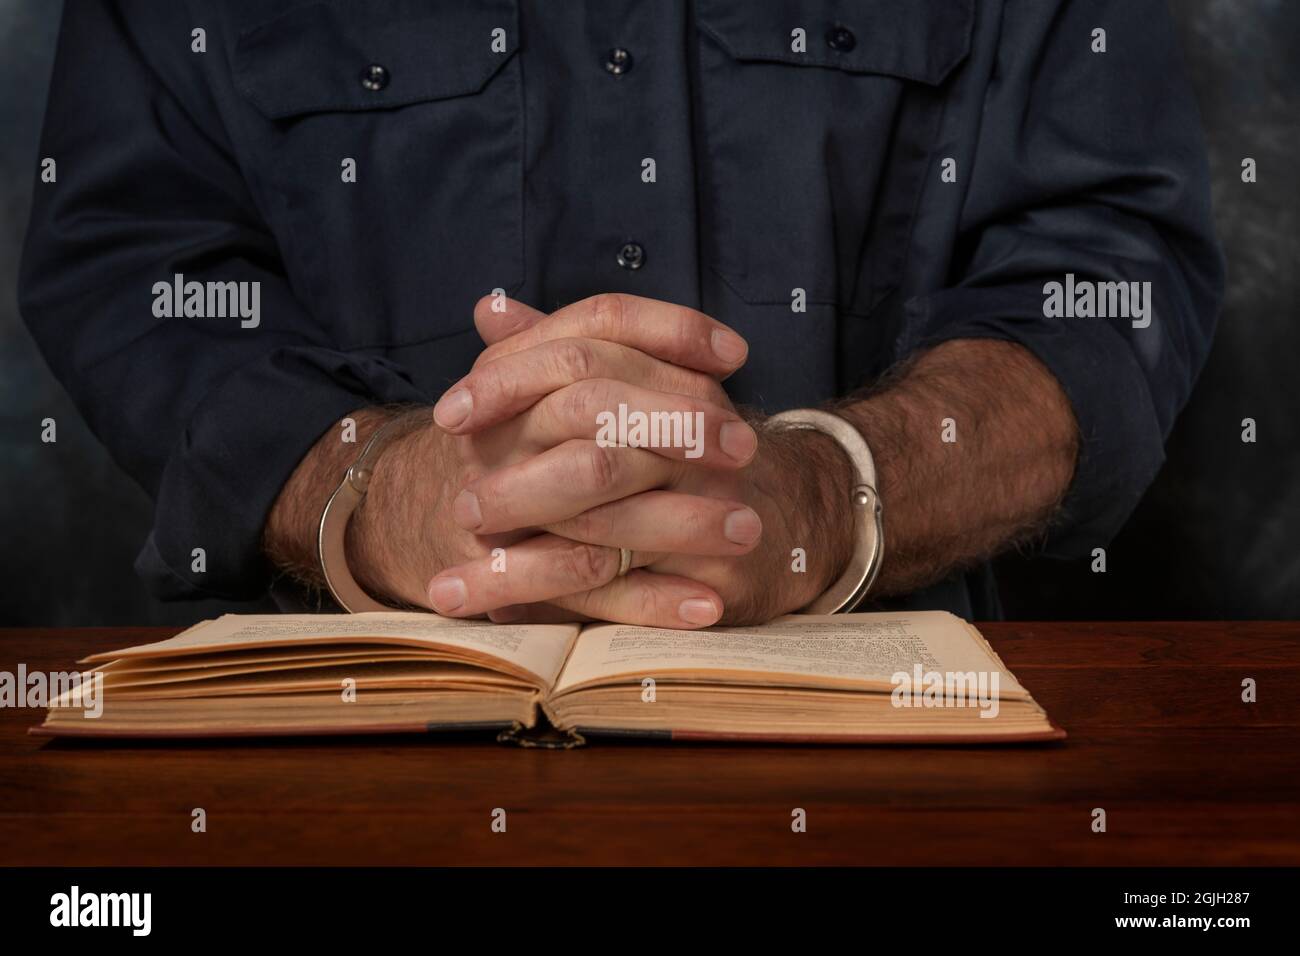 A arrested, handcuffed man with clasped hands reads a book about law, hoping to find a way to defend himself. Stock Photo